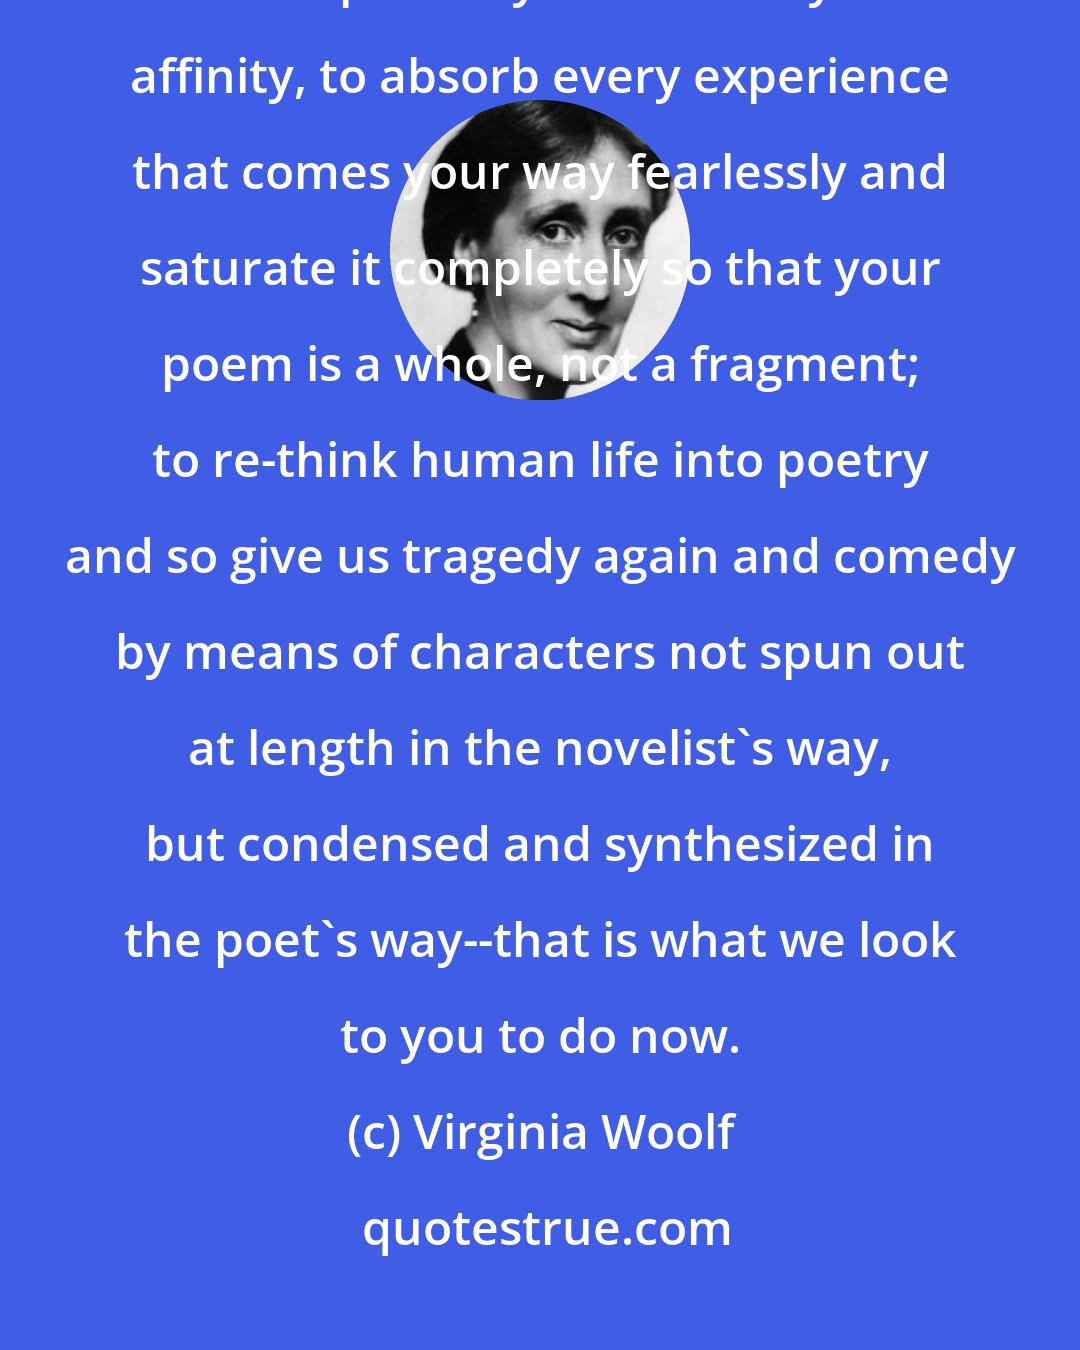 Virginia Woolf: That perhaps is your task--to find the relation between things that seem incompatible yet have a mysterious affinity, to absorb every experience that comes your way fearlessly and saturate it completely so that your poem is a whole, not a fragment; to re-think human life into poetry and so give us tragedy again and comedy by means of characters not spun out at length in the novelist's way, but condensed and synthesized in the poet's way--that is what we look to you to do now.